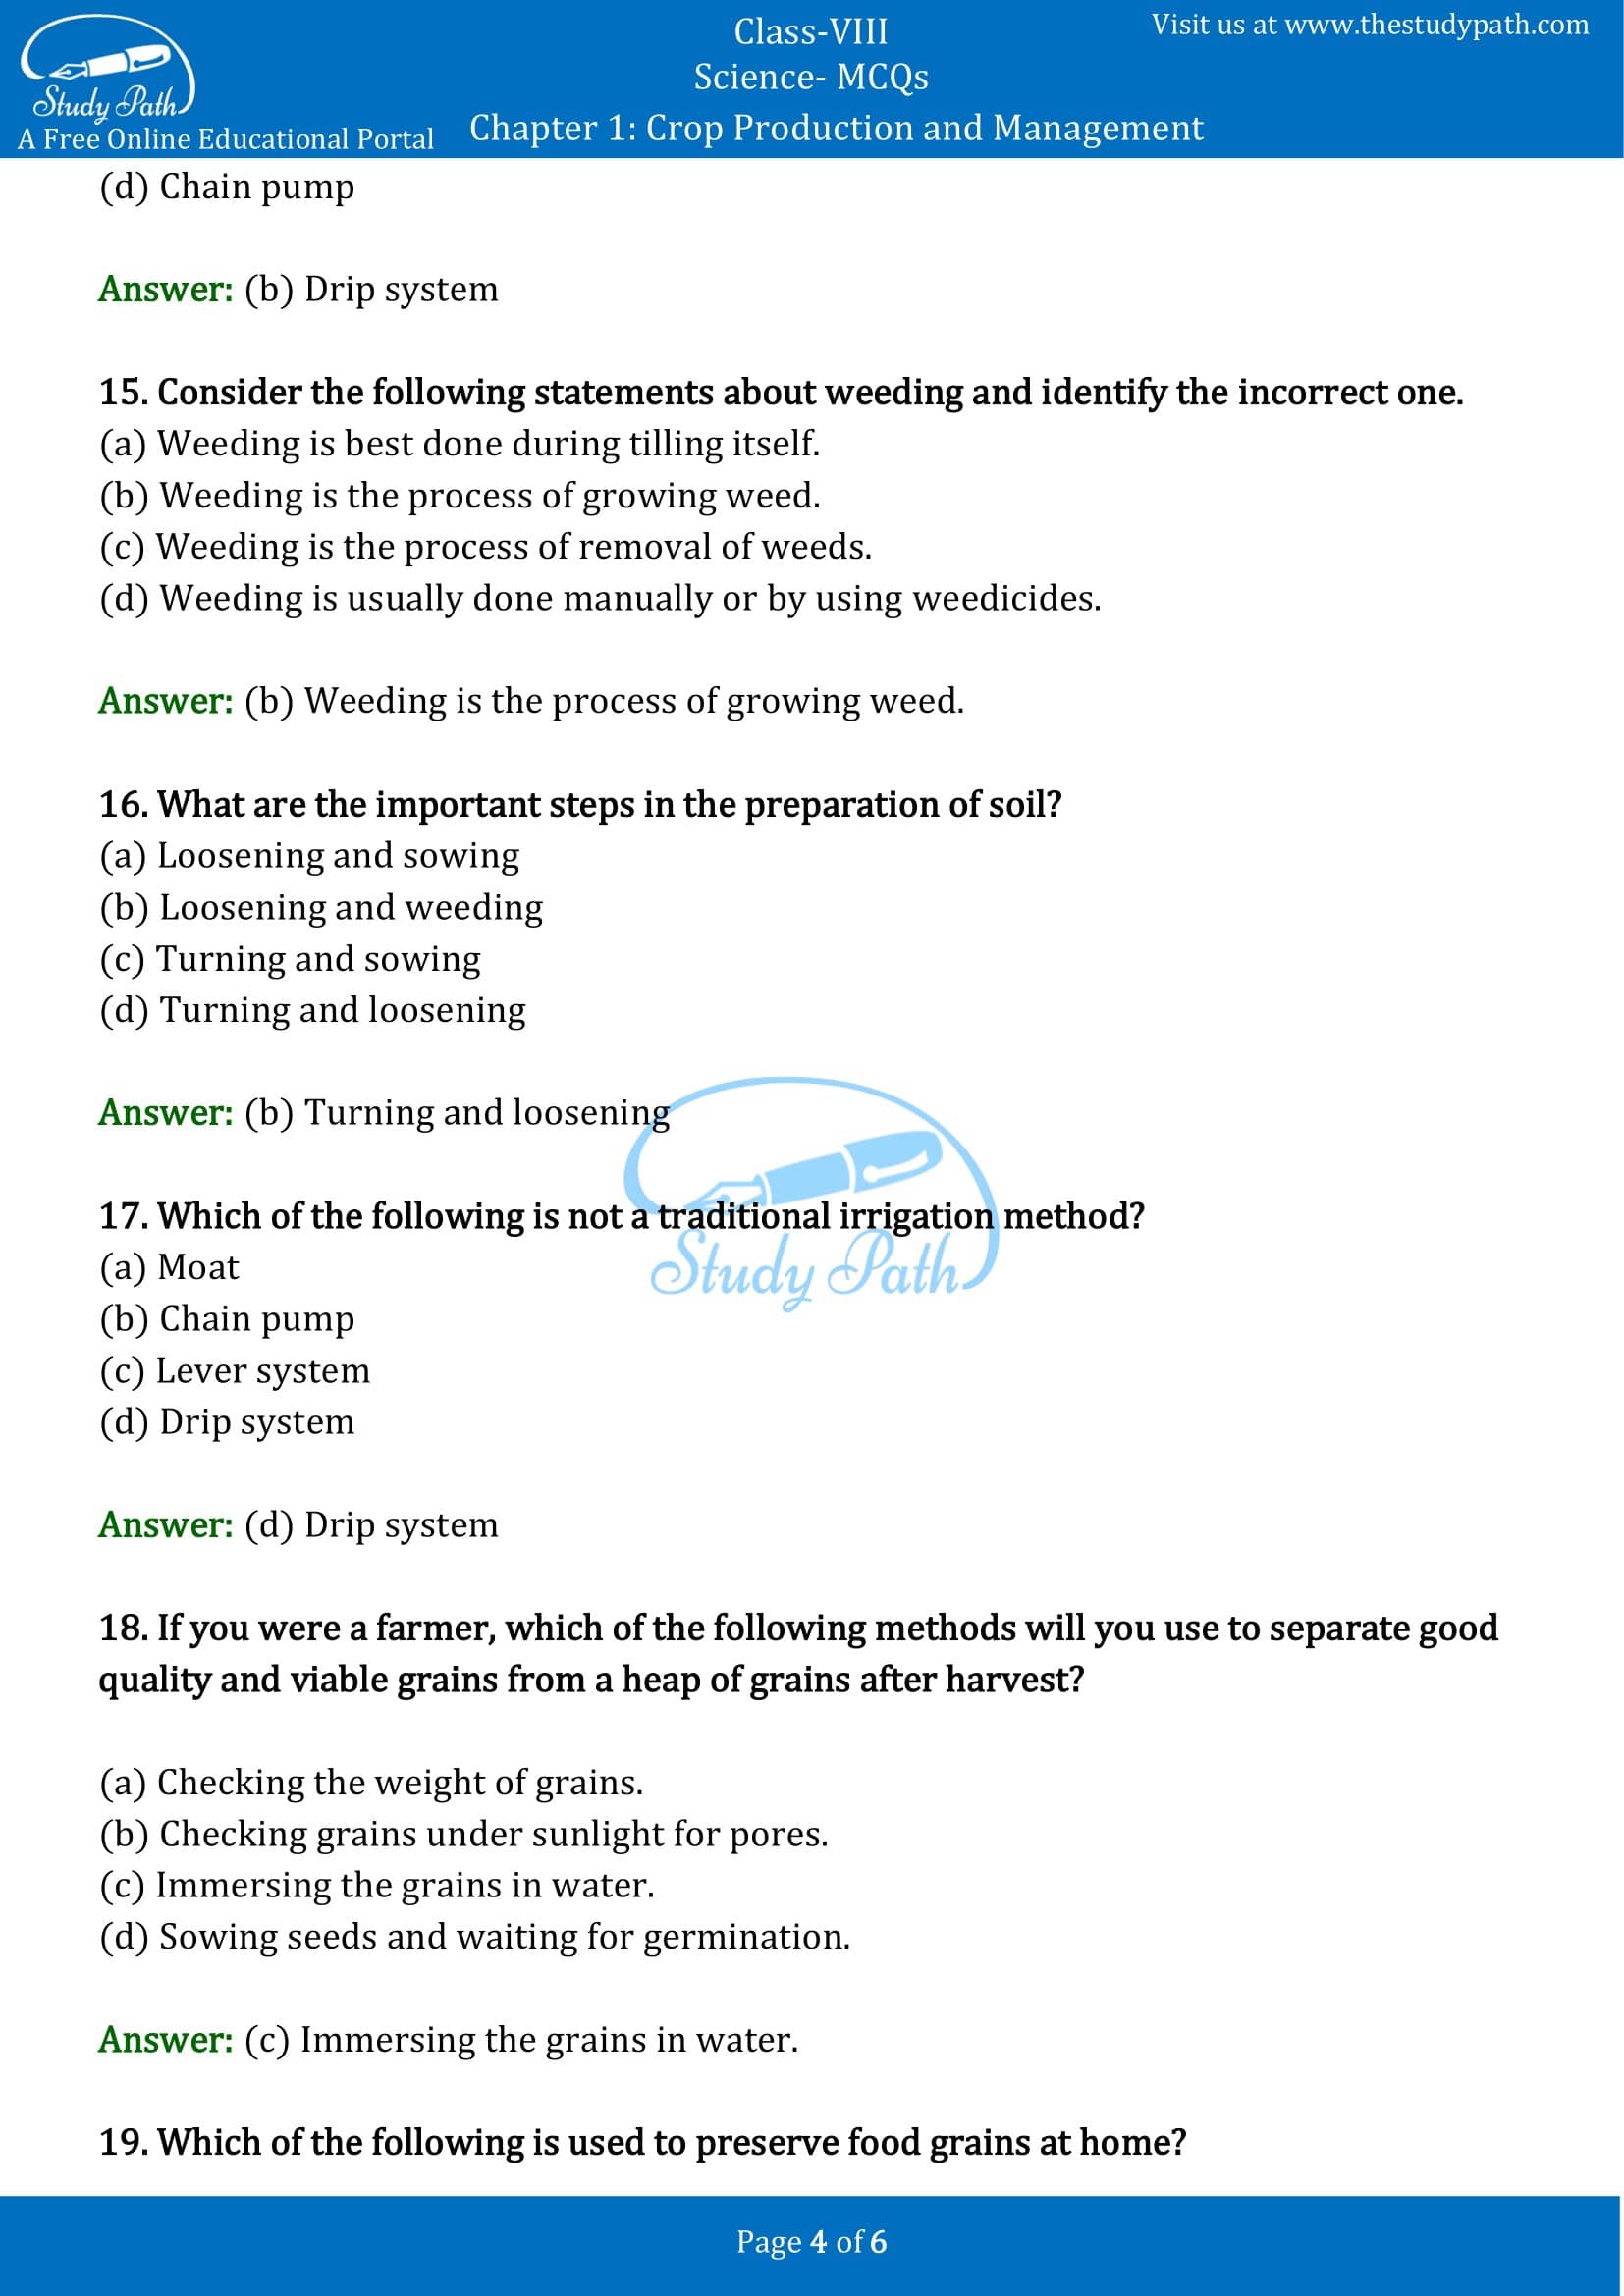 class 8 assignment science